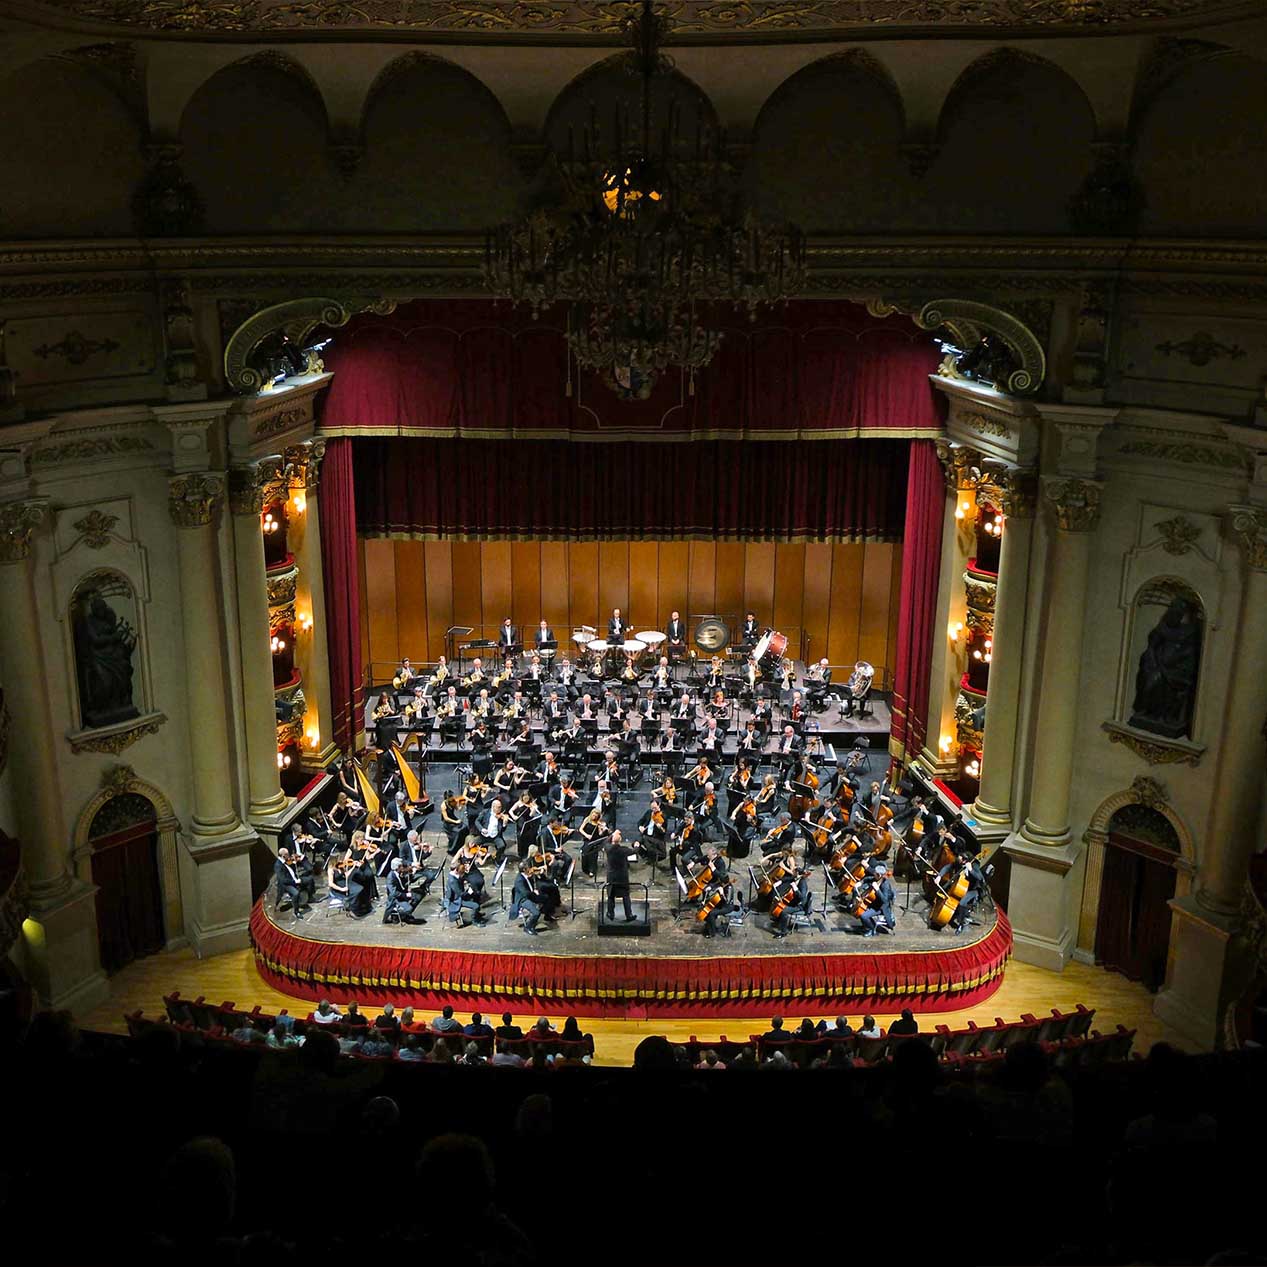 Five months of operas and concerts at the Filarmonico sees over 18,000 spectators in attendance